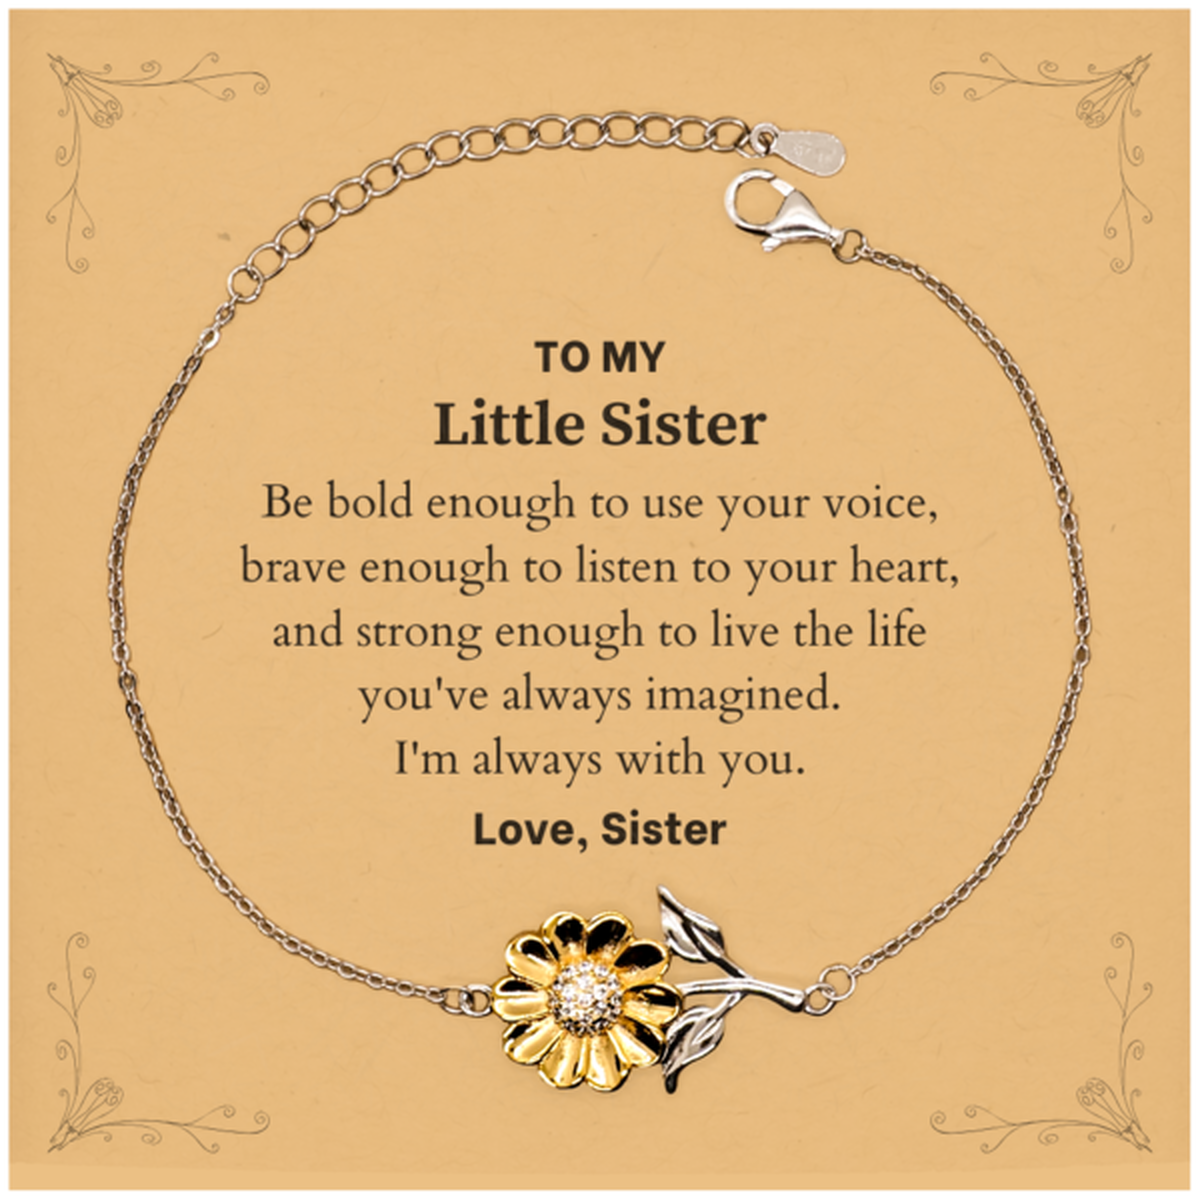 Keepsake Little Sister Sunflower Bracelet Gift Idea Graduation Christmas Birthday Little Sister from Sister, Little Sister Be bold enough to use your voice, brave enough to listen to your heart. Love, Sister